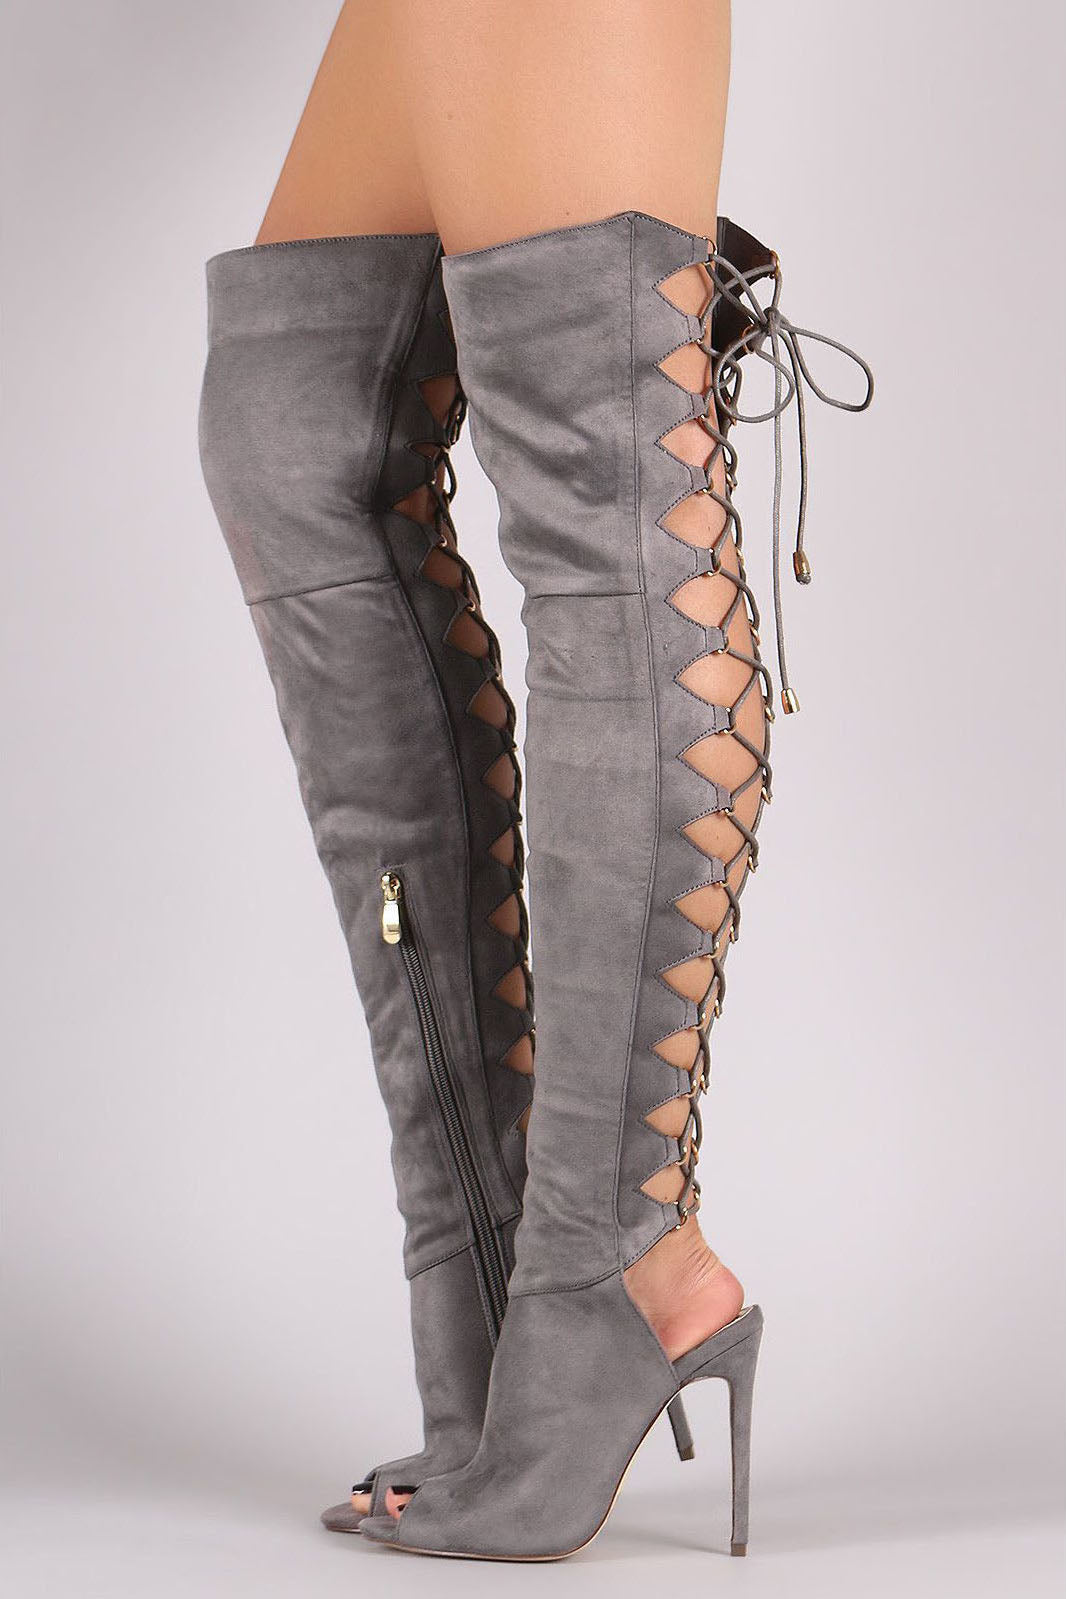 Back Lace Up Cut Out Peep Toe Over-knee Long Boot Sandals